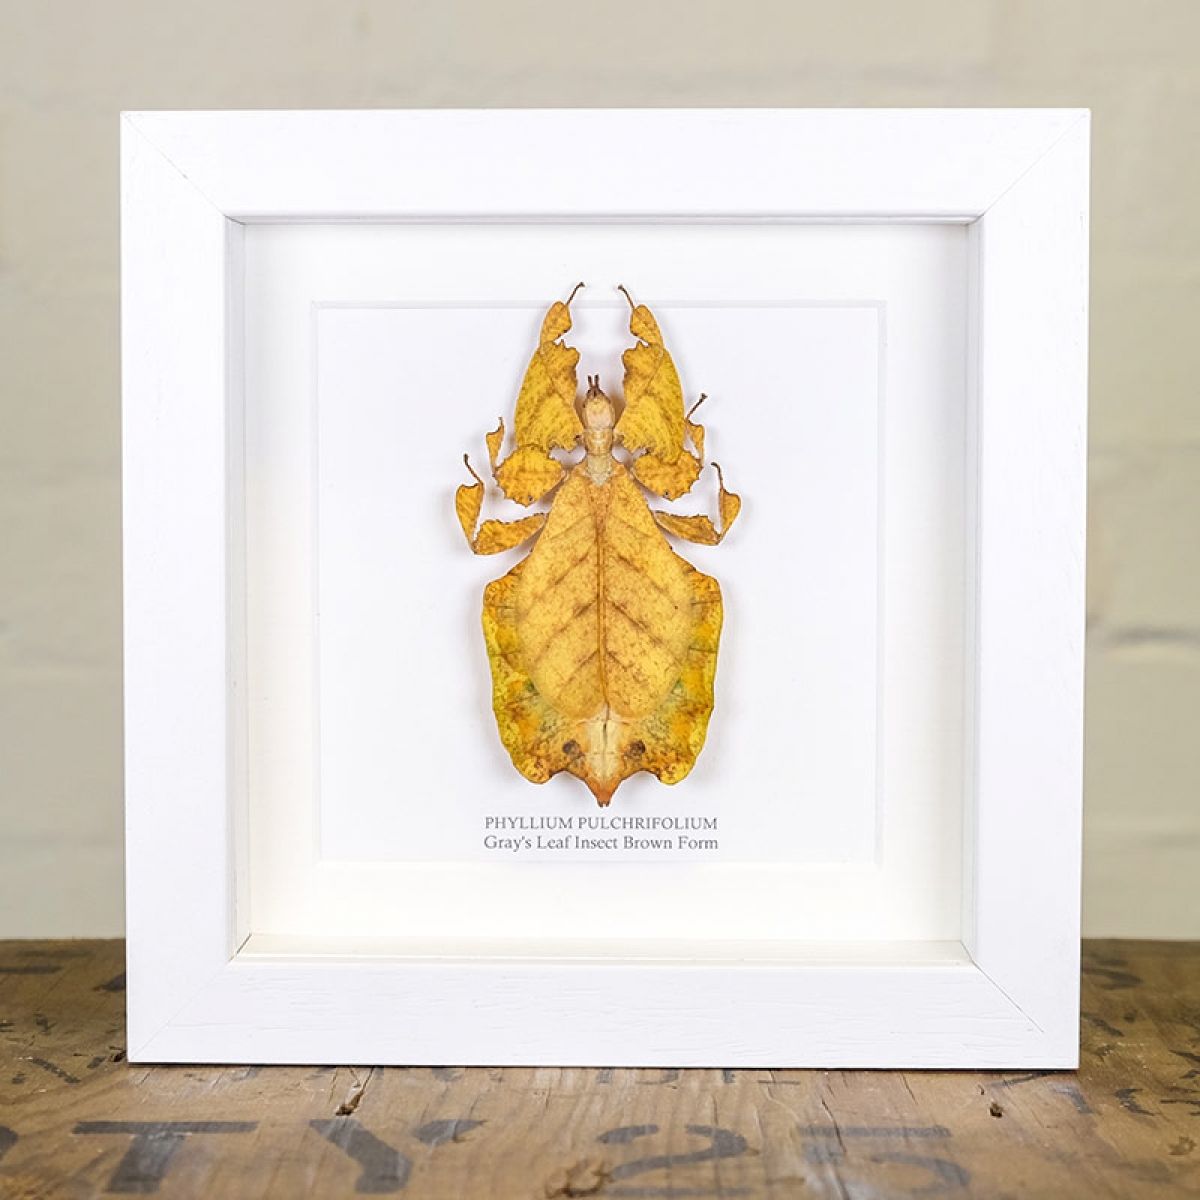 Gray's Leaf Insect Brown Form in Box Frame (Phyllium bioculatum)